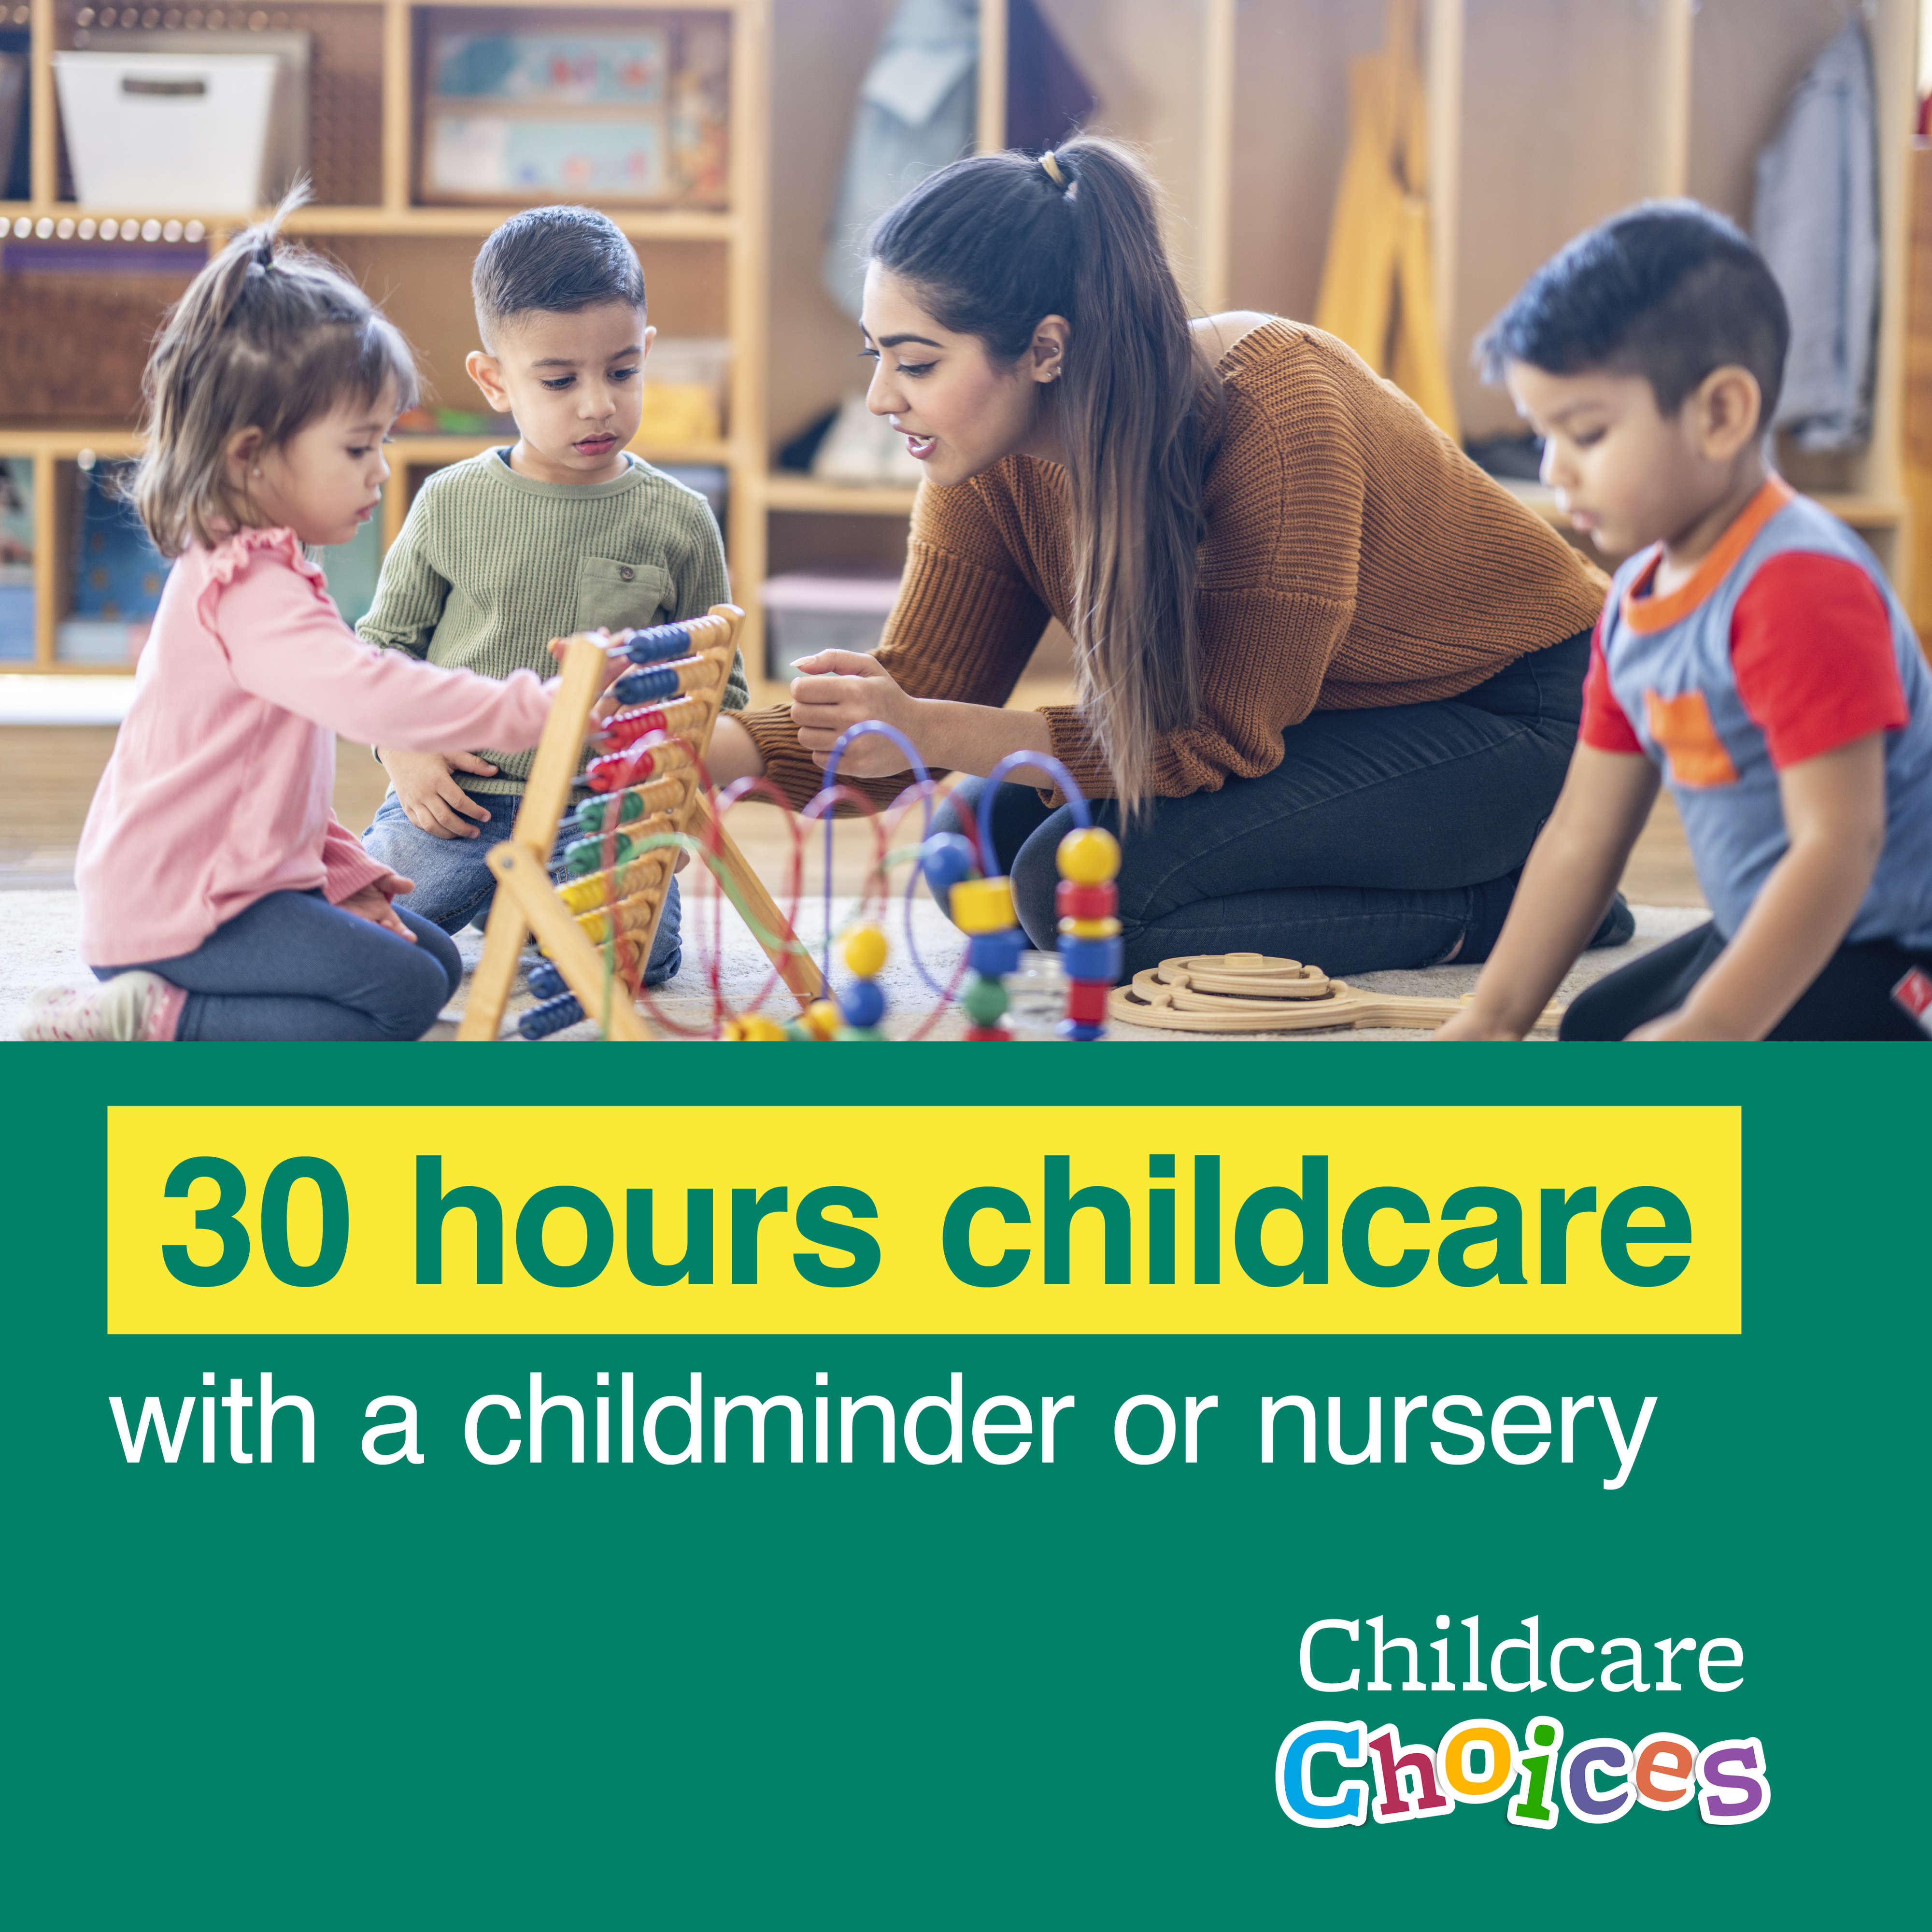 Childcare Choices carousel slide 2 display image